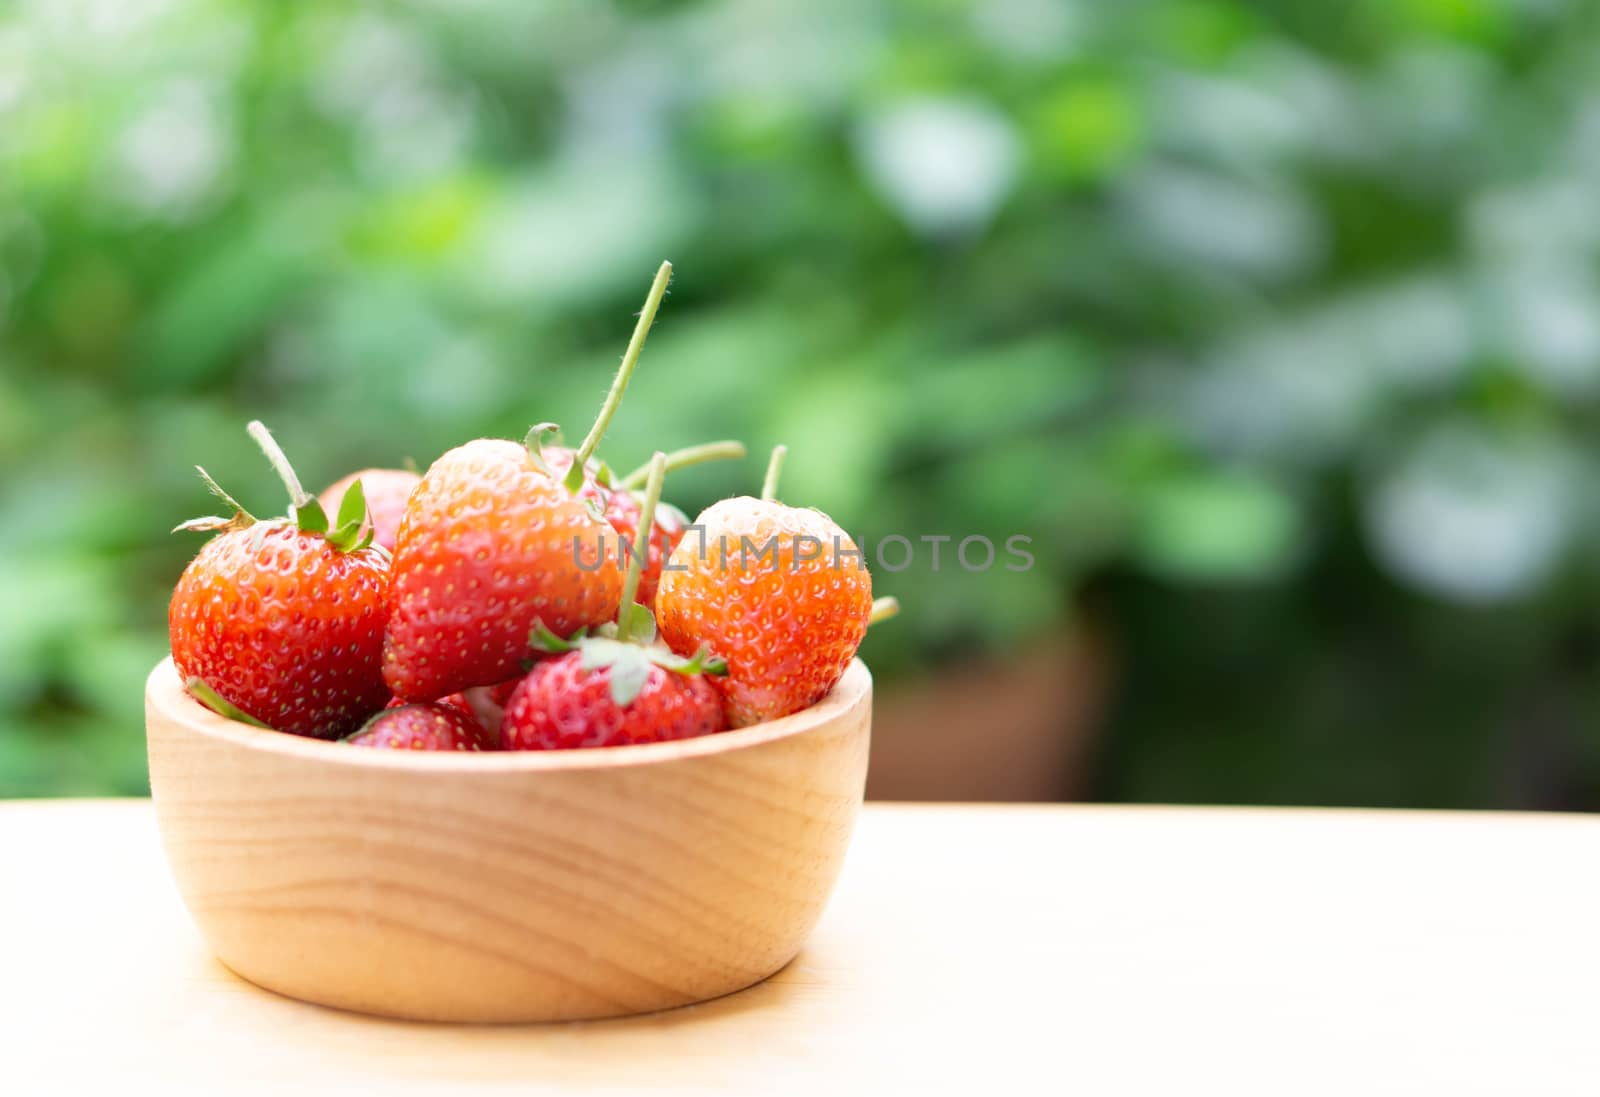 Closeup red strawberry in wood bowl with green nature background, selective focus